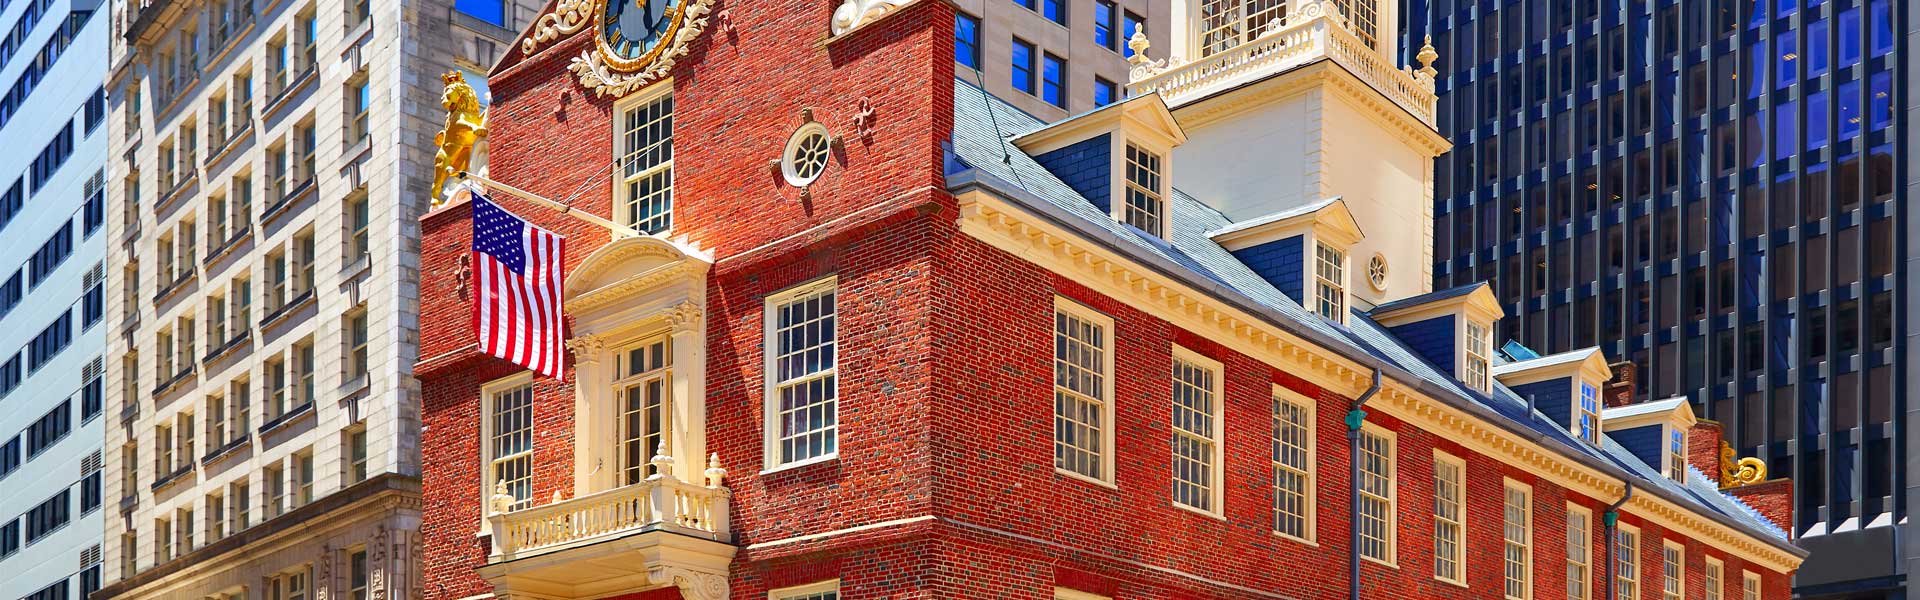 View of Old State House in Boston